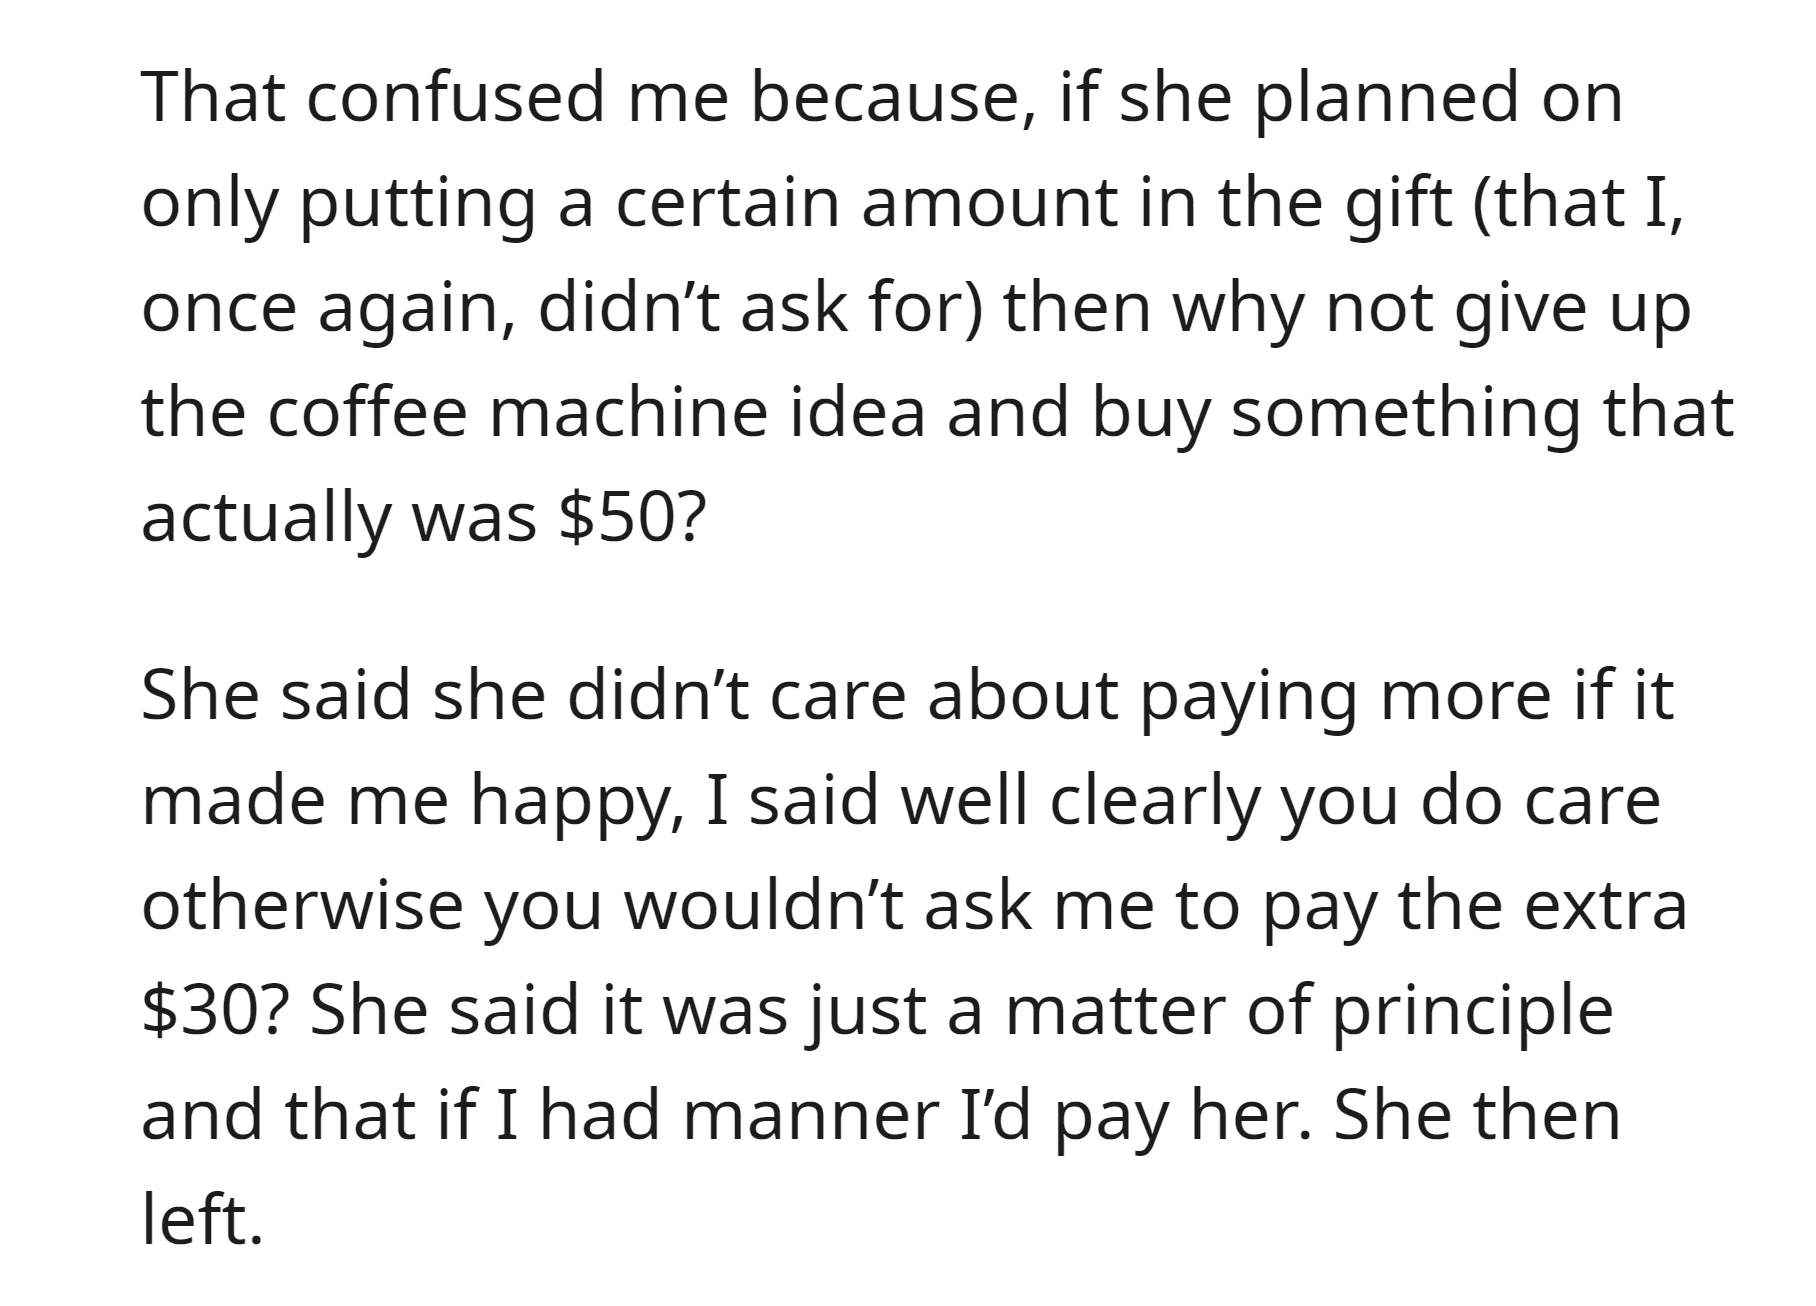 OP didn't understand why her mother-in-law didn't choose a cheaper gift